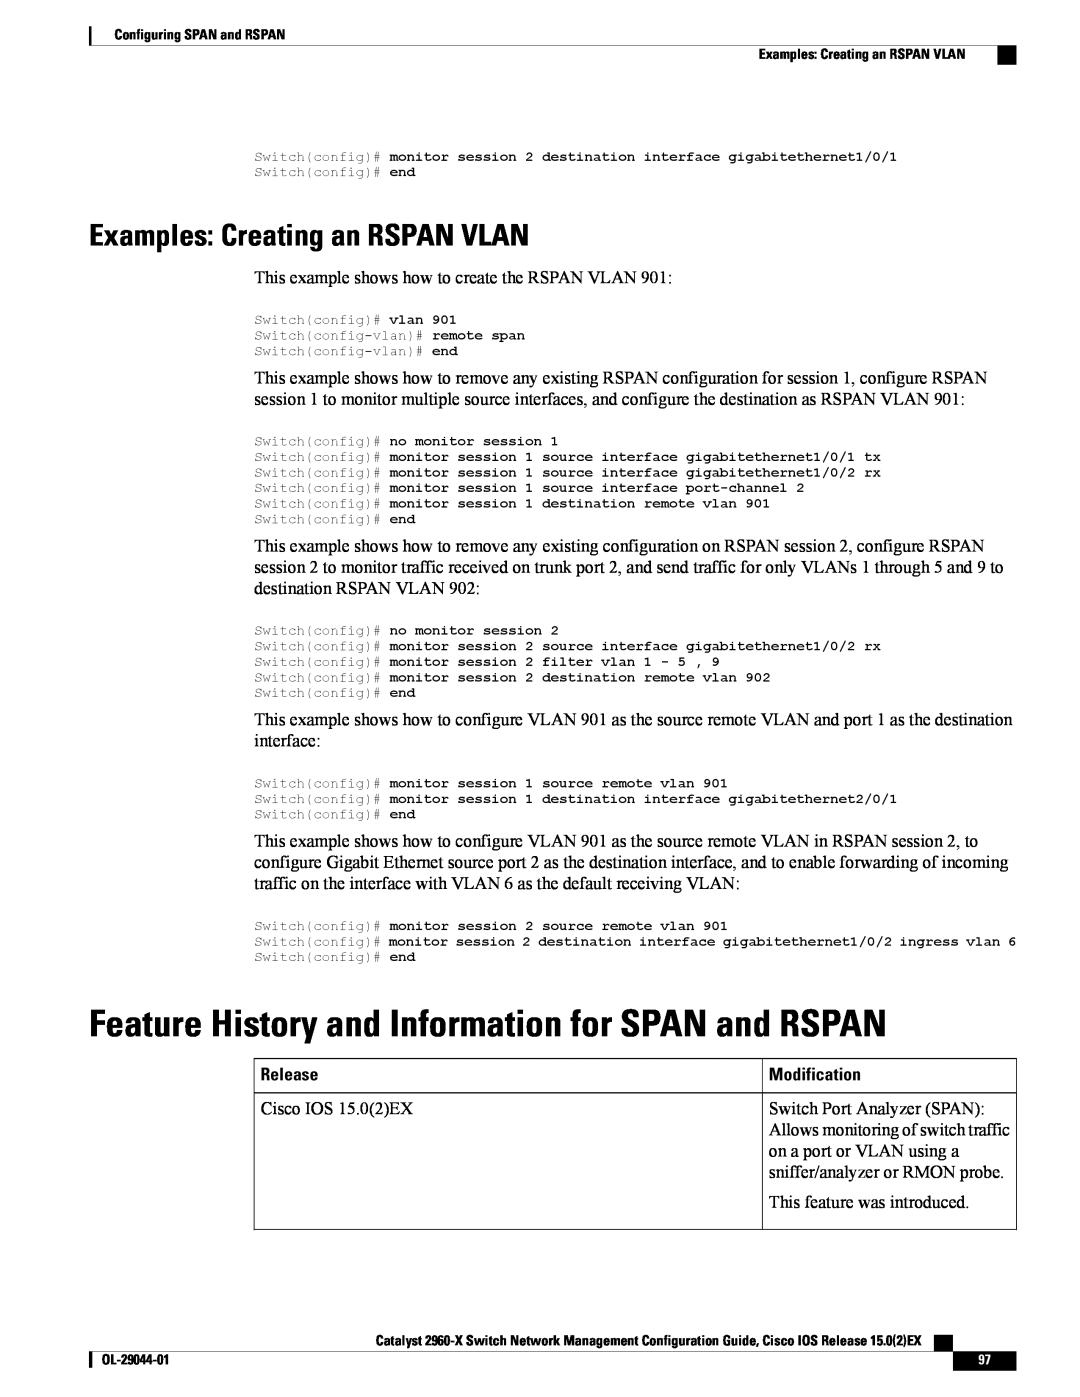 Cisco Systems WSC2960X24PDL Feature History and Information for SPAN and RSPAN, Examples Creating an RSPAN VLAN, Release 